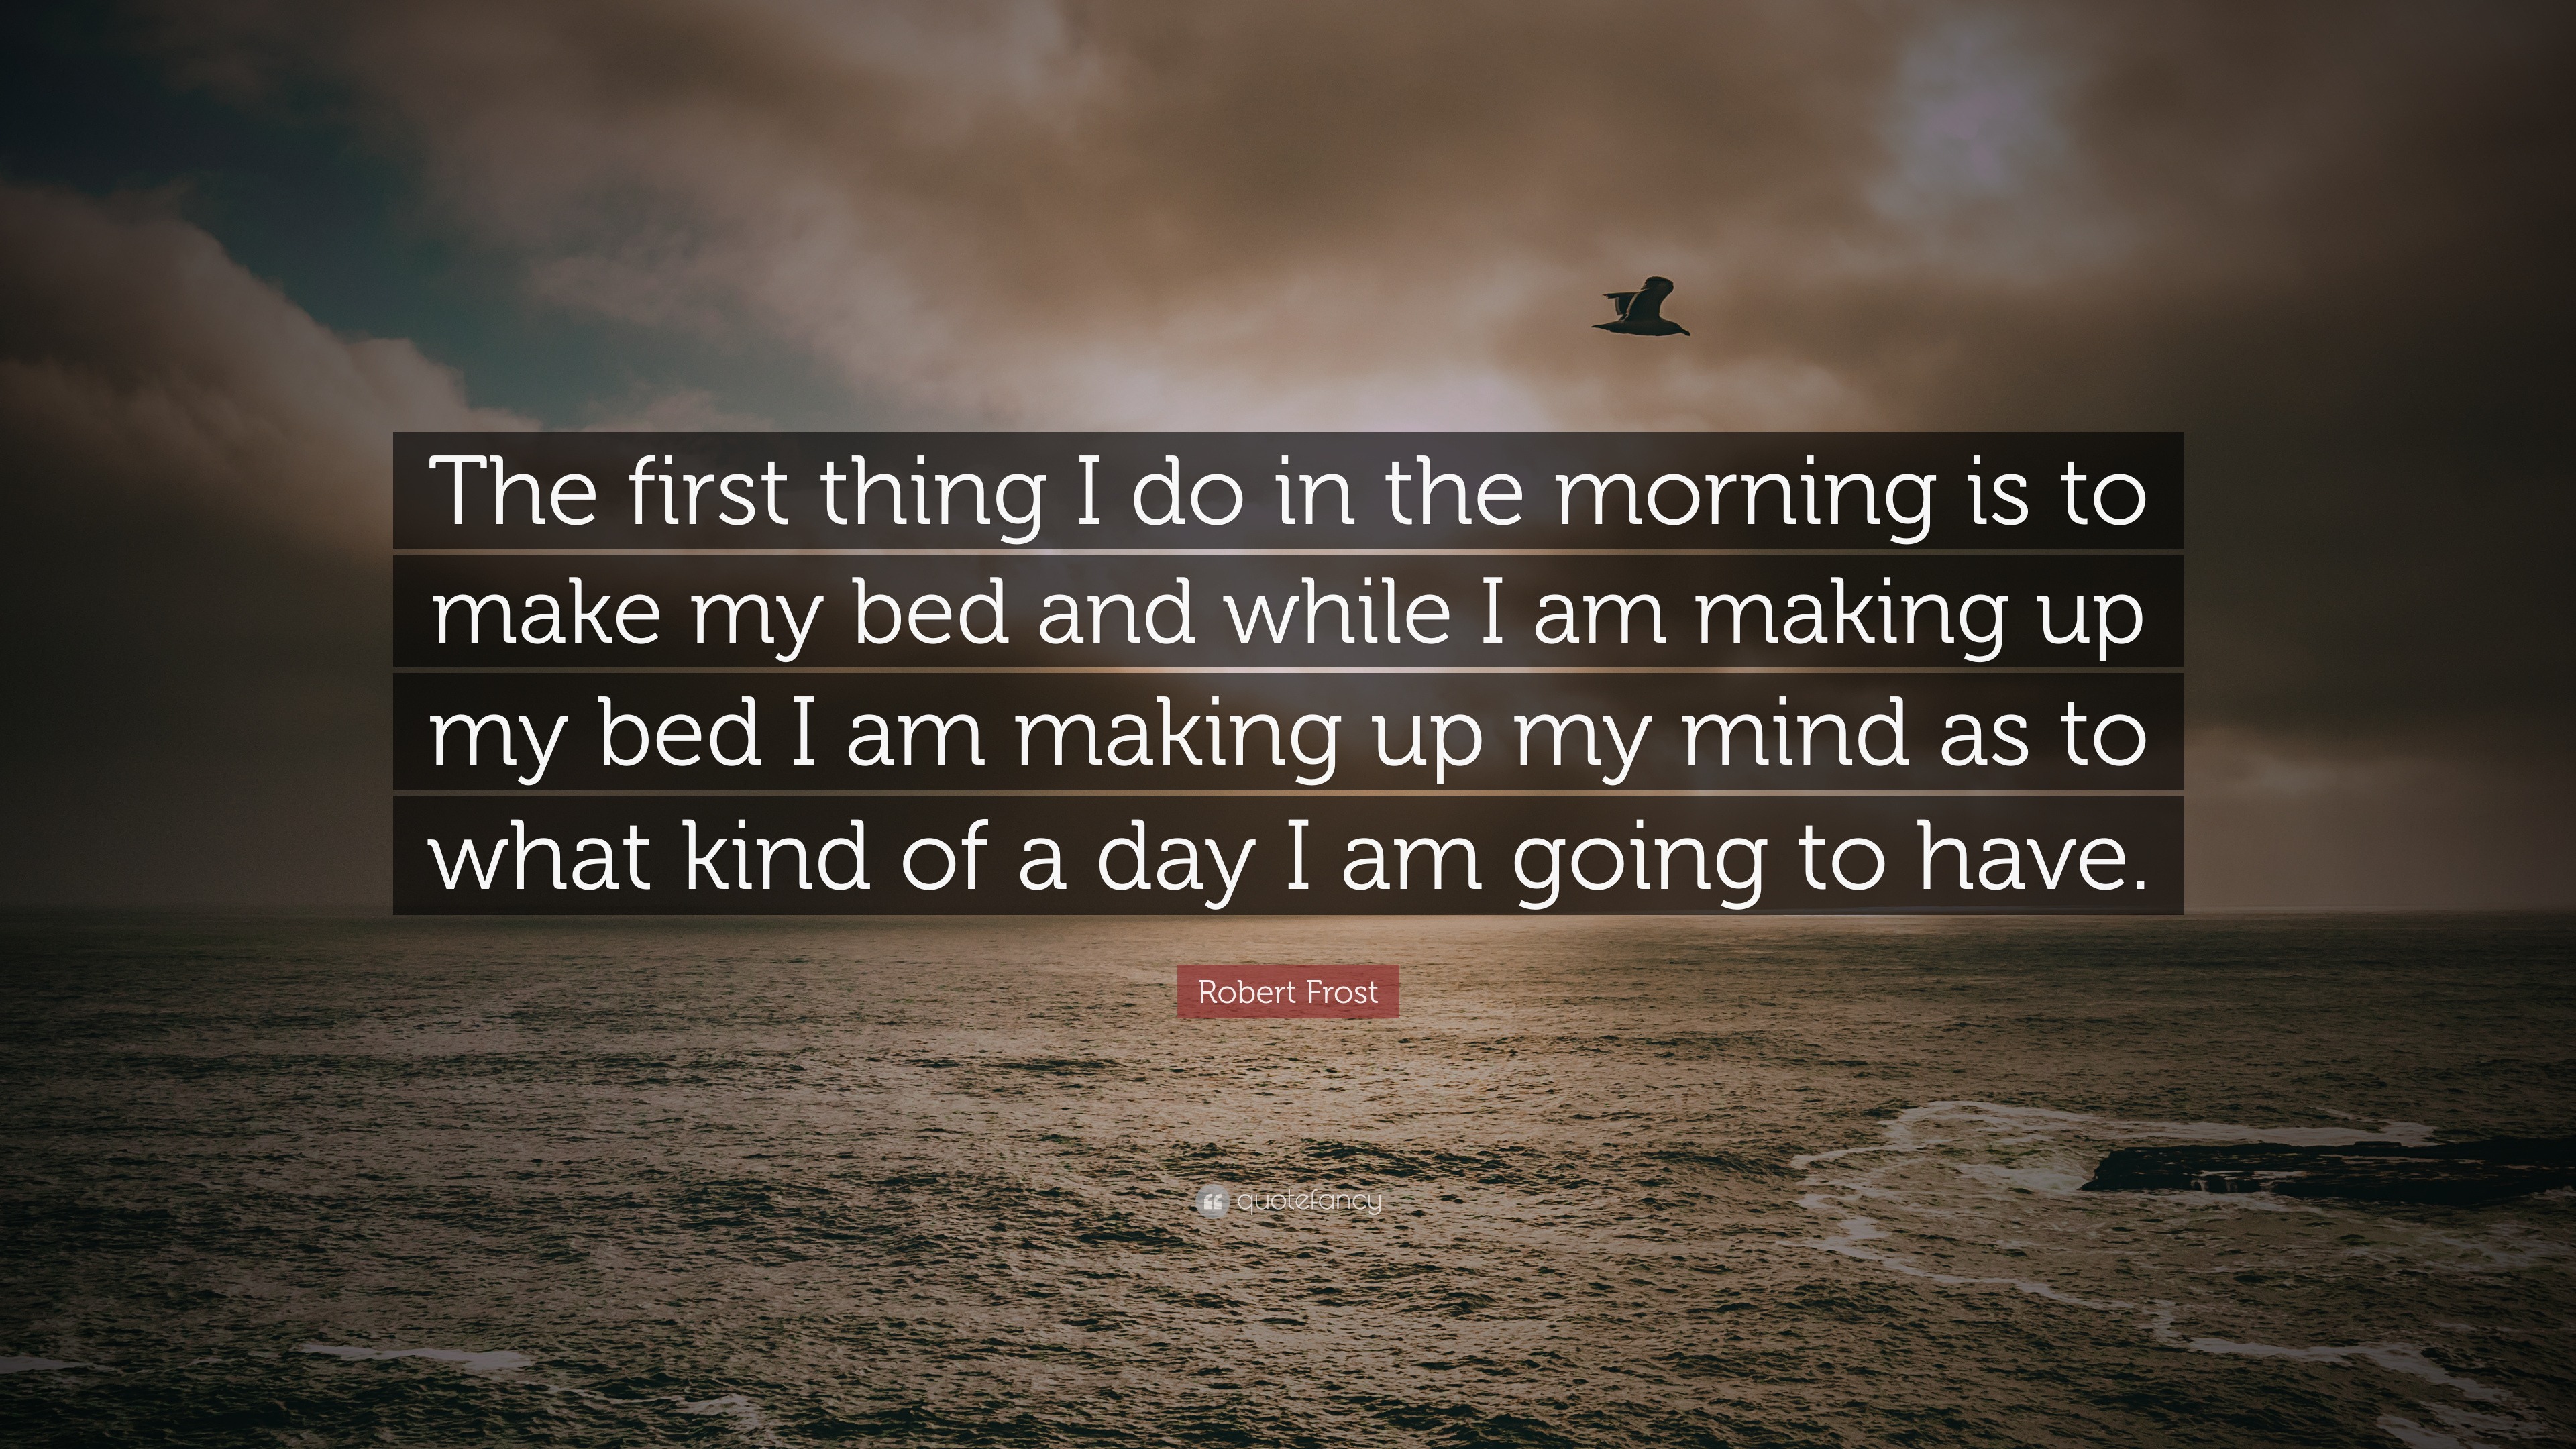 Robert Frost Quote “The first thing I do in the morning is to make